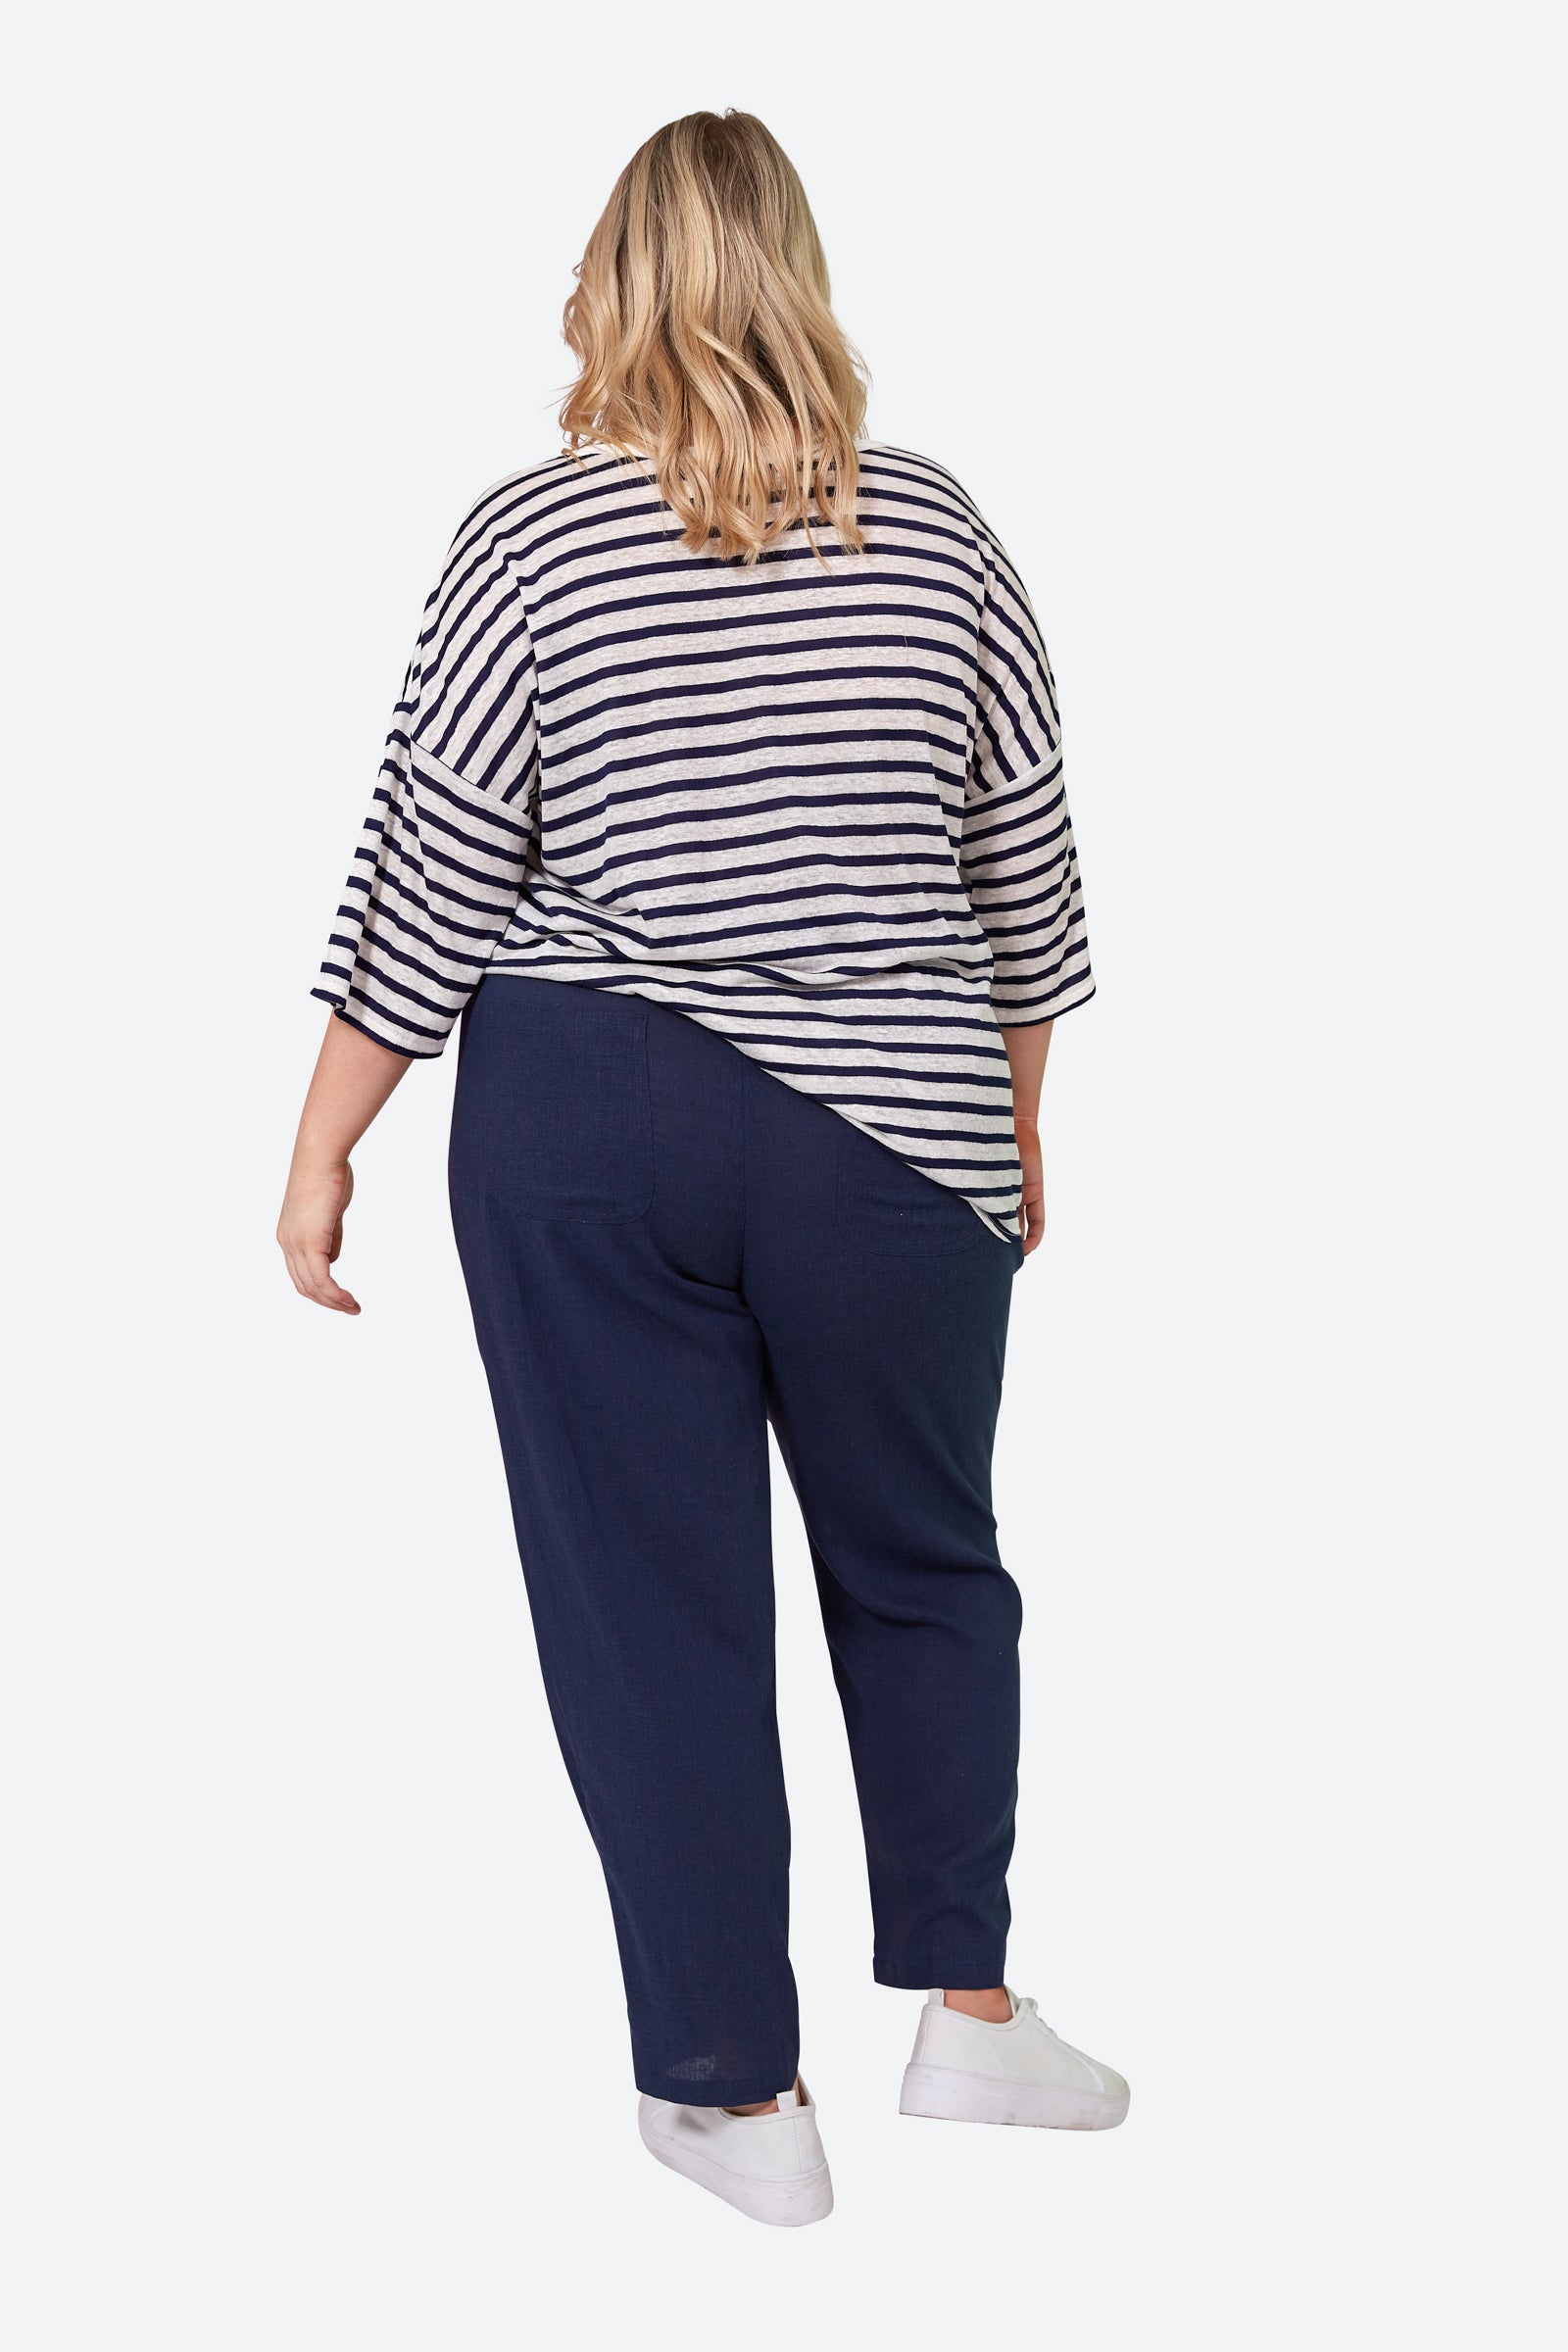 Verve Pant - Sapphire - eb&ive Clothing - Pant Relaxed Linen